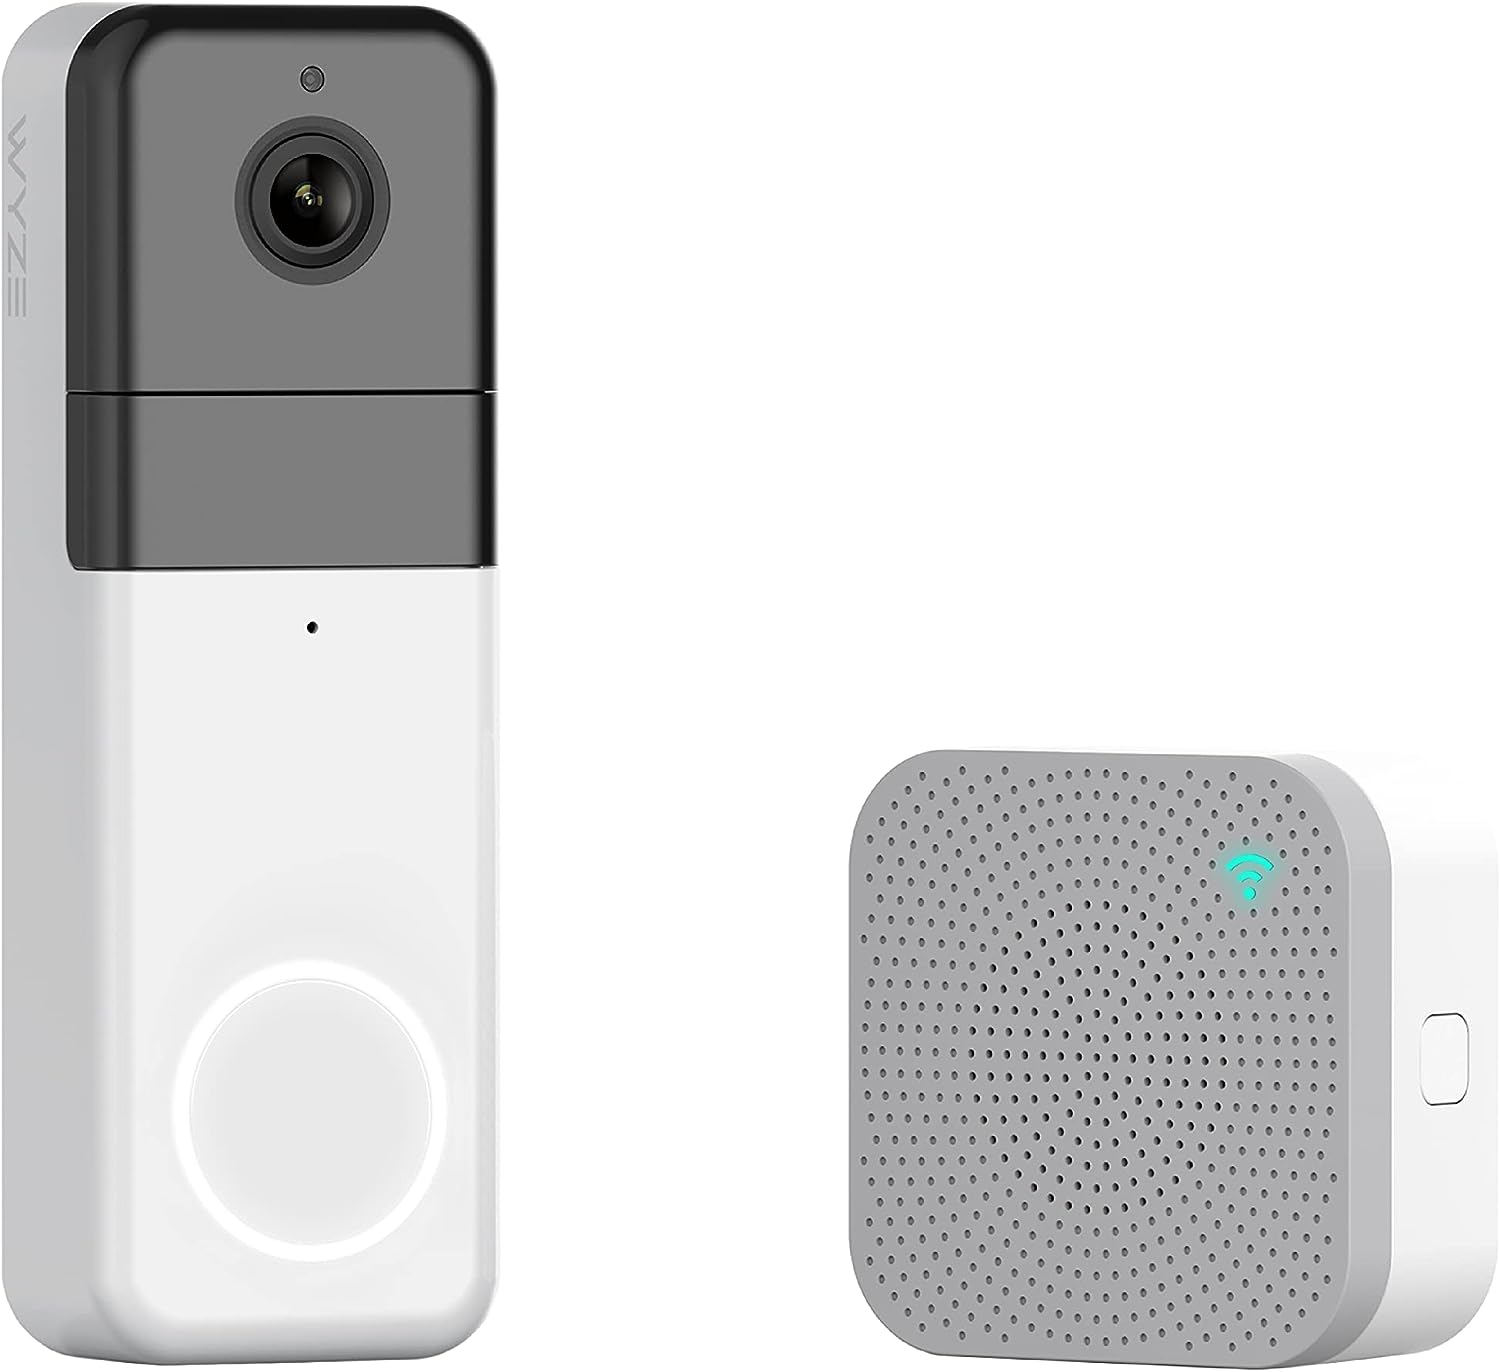 Lookover of Wyze Wireless Video Doorbell Pro (Chime Included)